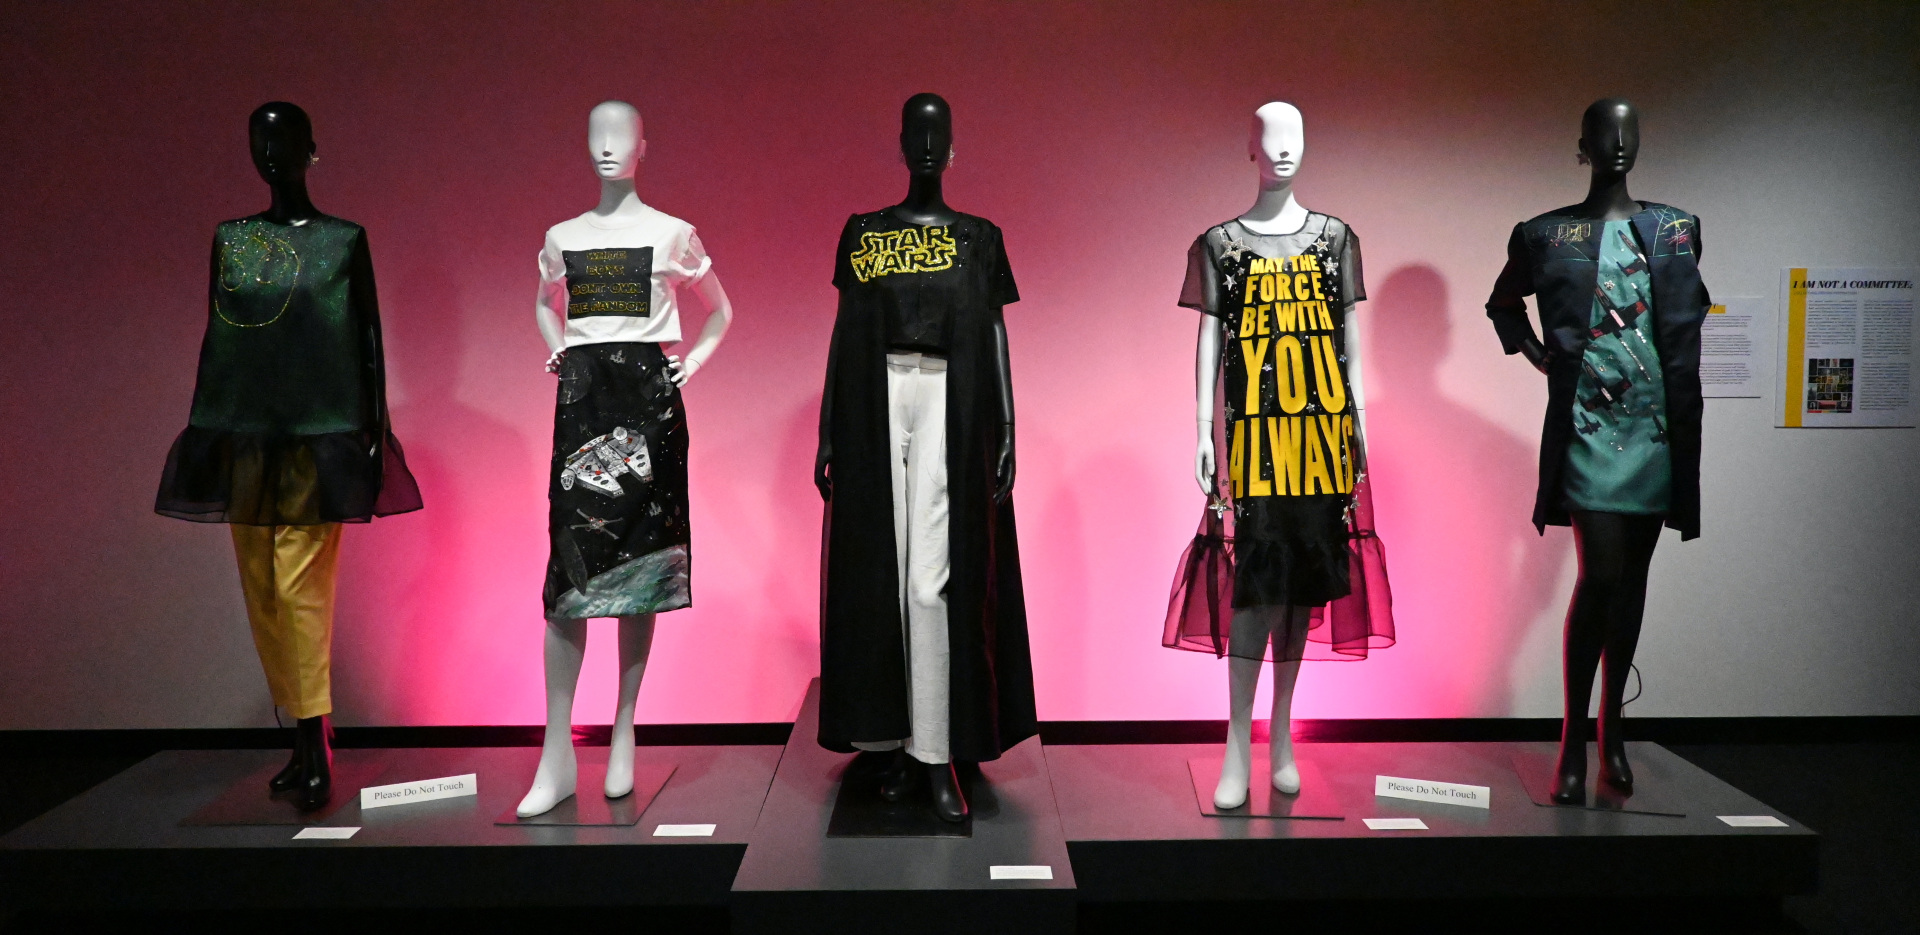 Five mannequin's on display dressed in garments from "A Woman's Place is in the Resistance." The display is backlit in a pink shade. 